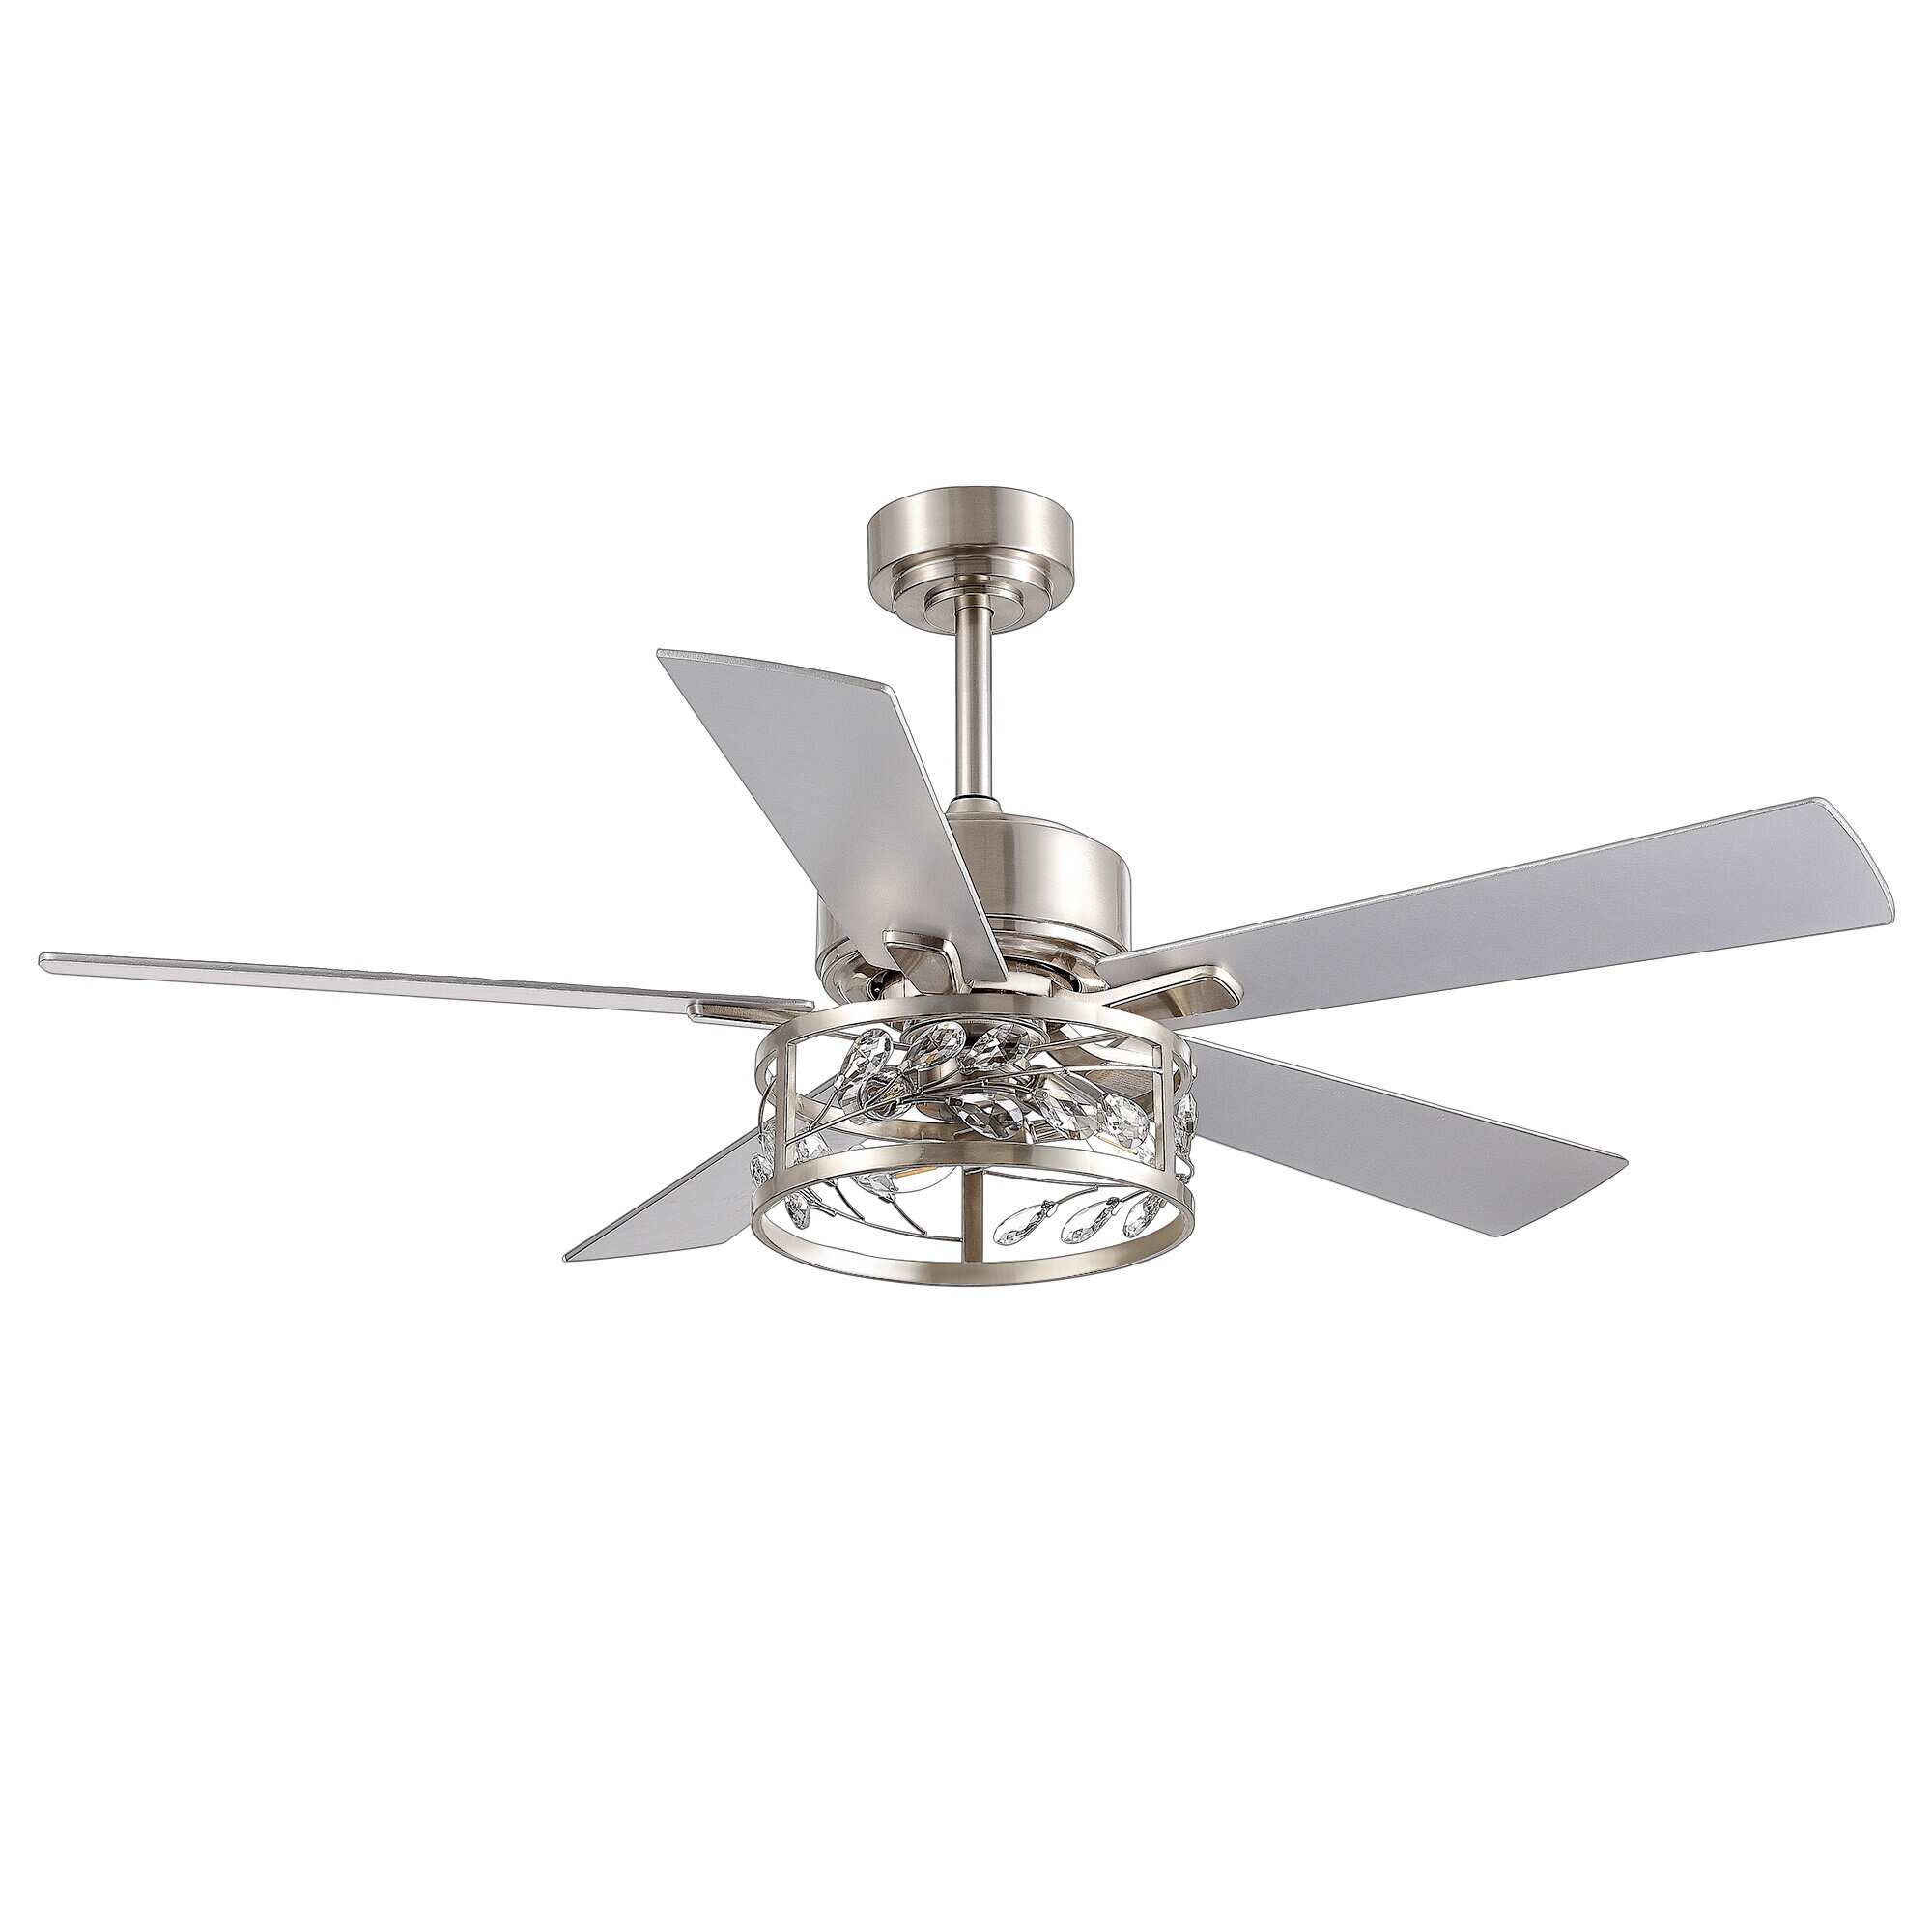 52" 5 Blade Bedroom Ceiling Fans with Crystal Lights Remote Control - 52 Inch